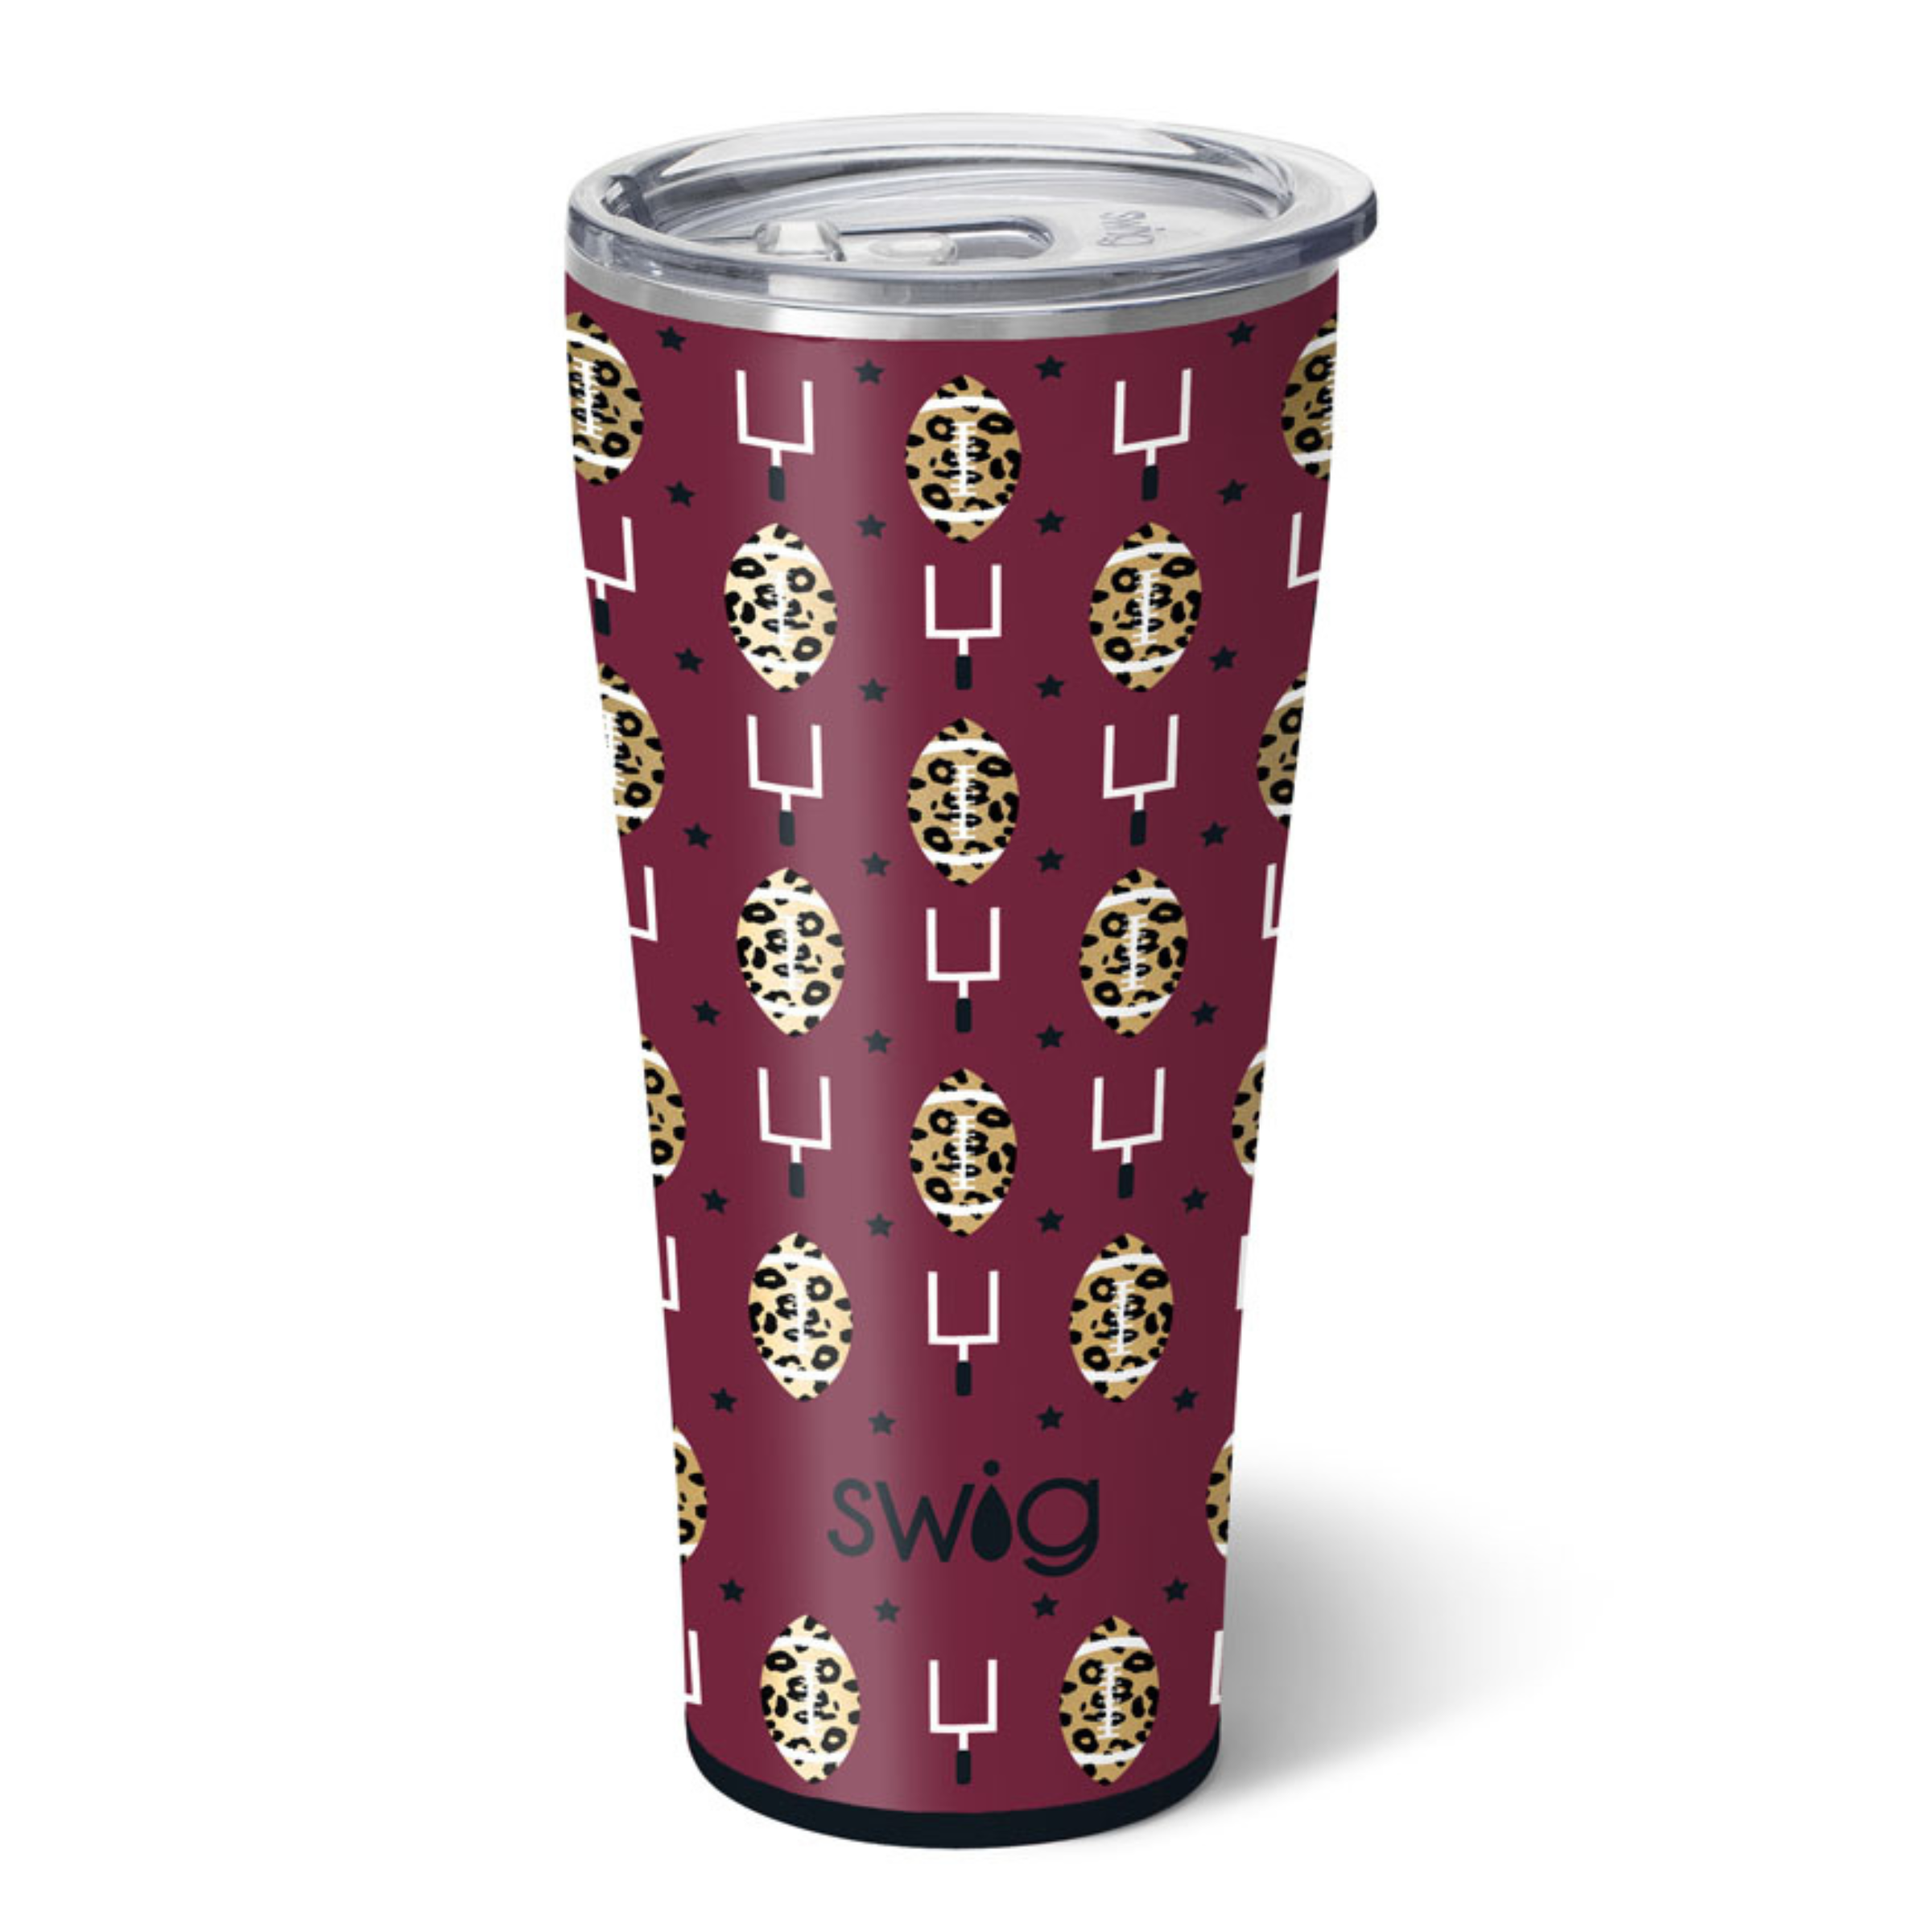 Touchdown maroon and black 32 oz tumbler. The cup is maroon with cheetah print footballs on it and field goal decorations. The background of the photo is white.